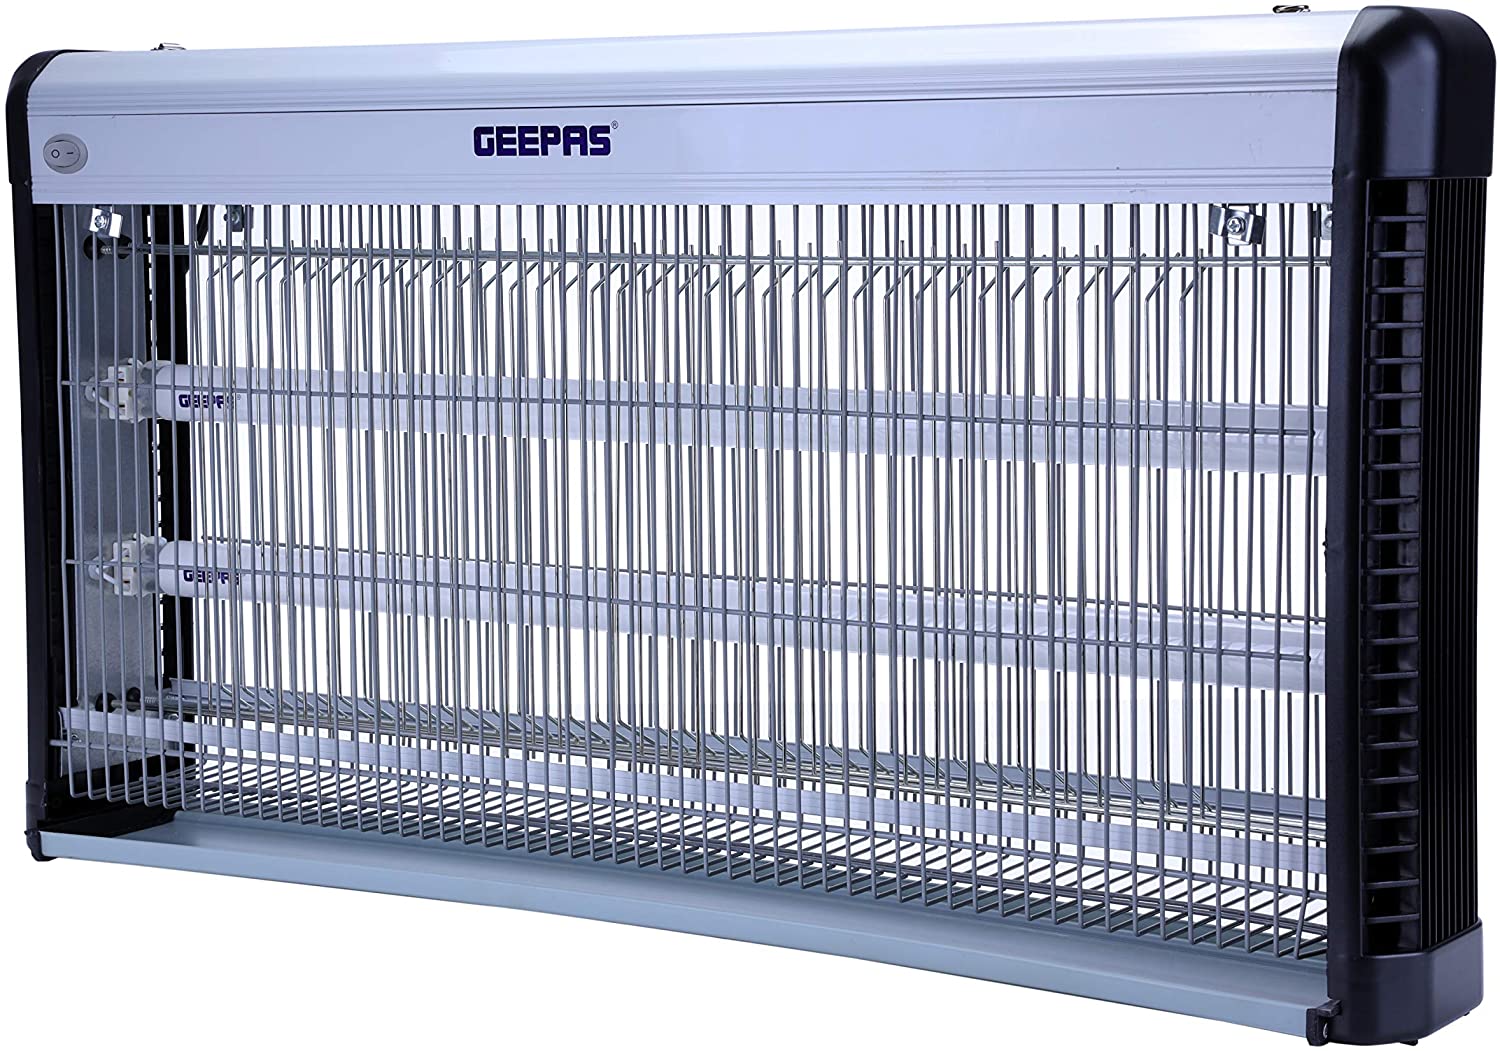 Geepas Insect Killer | in Bahrain | Halabh.com